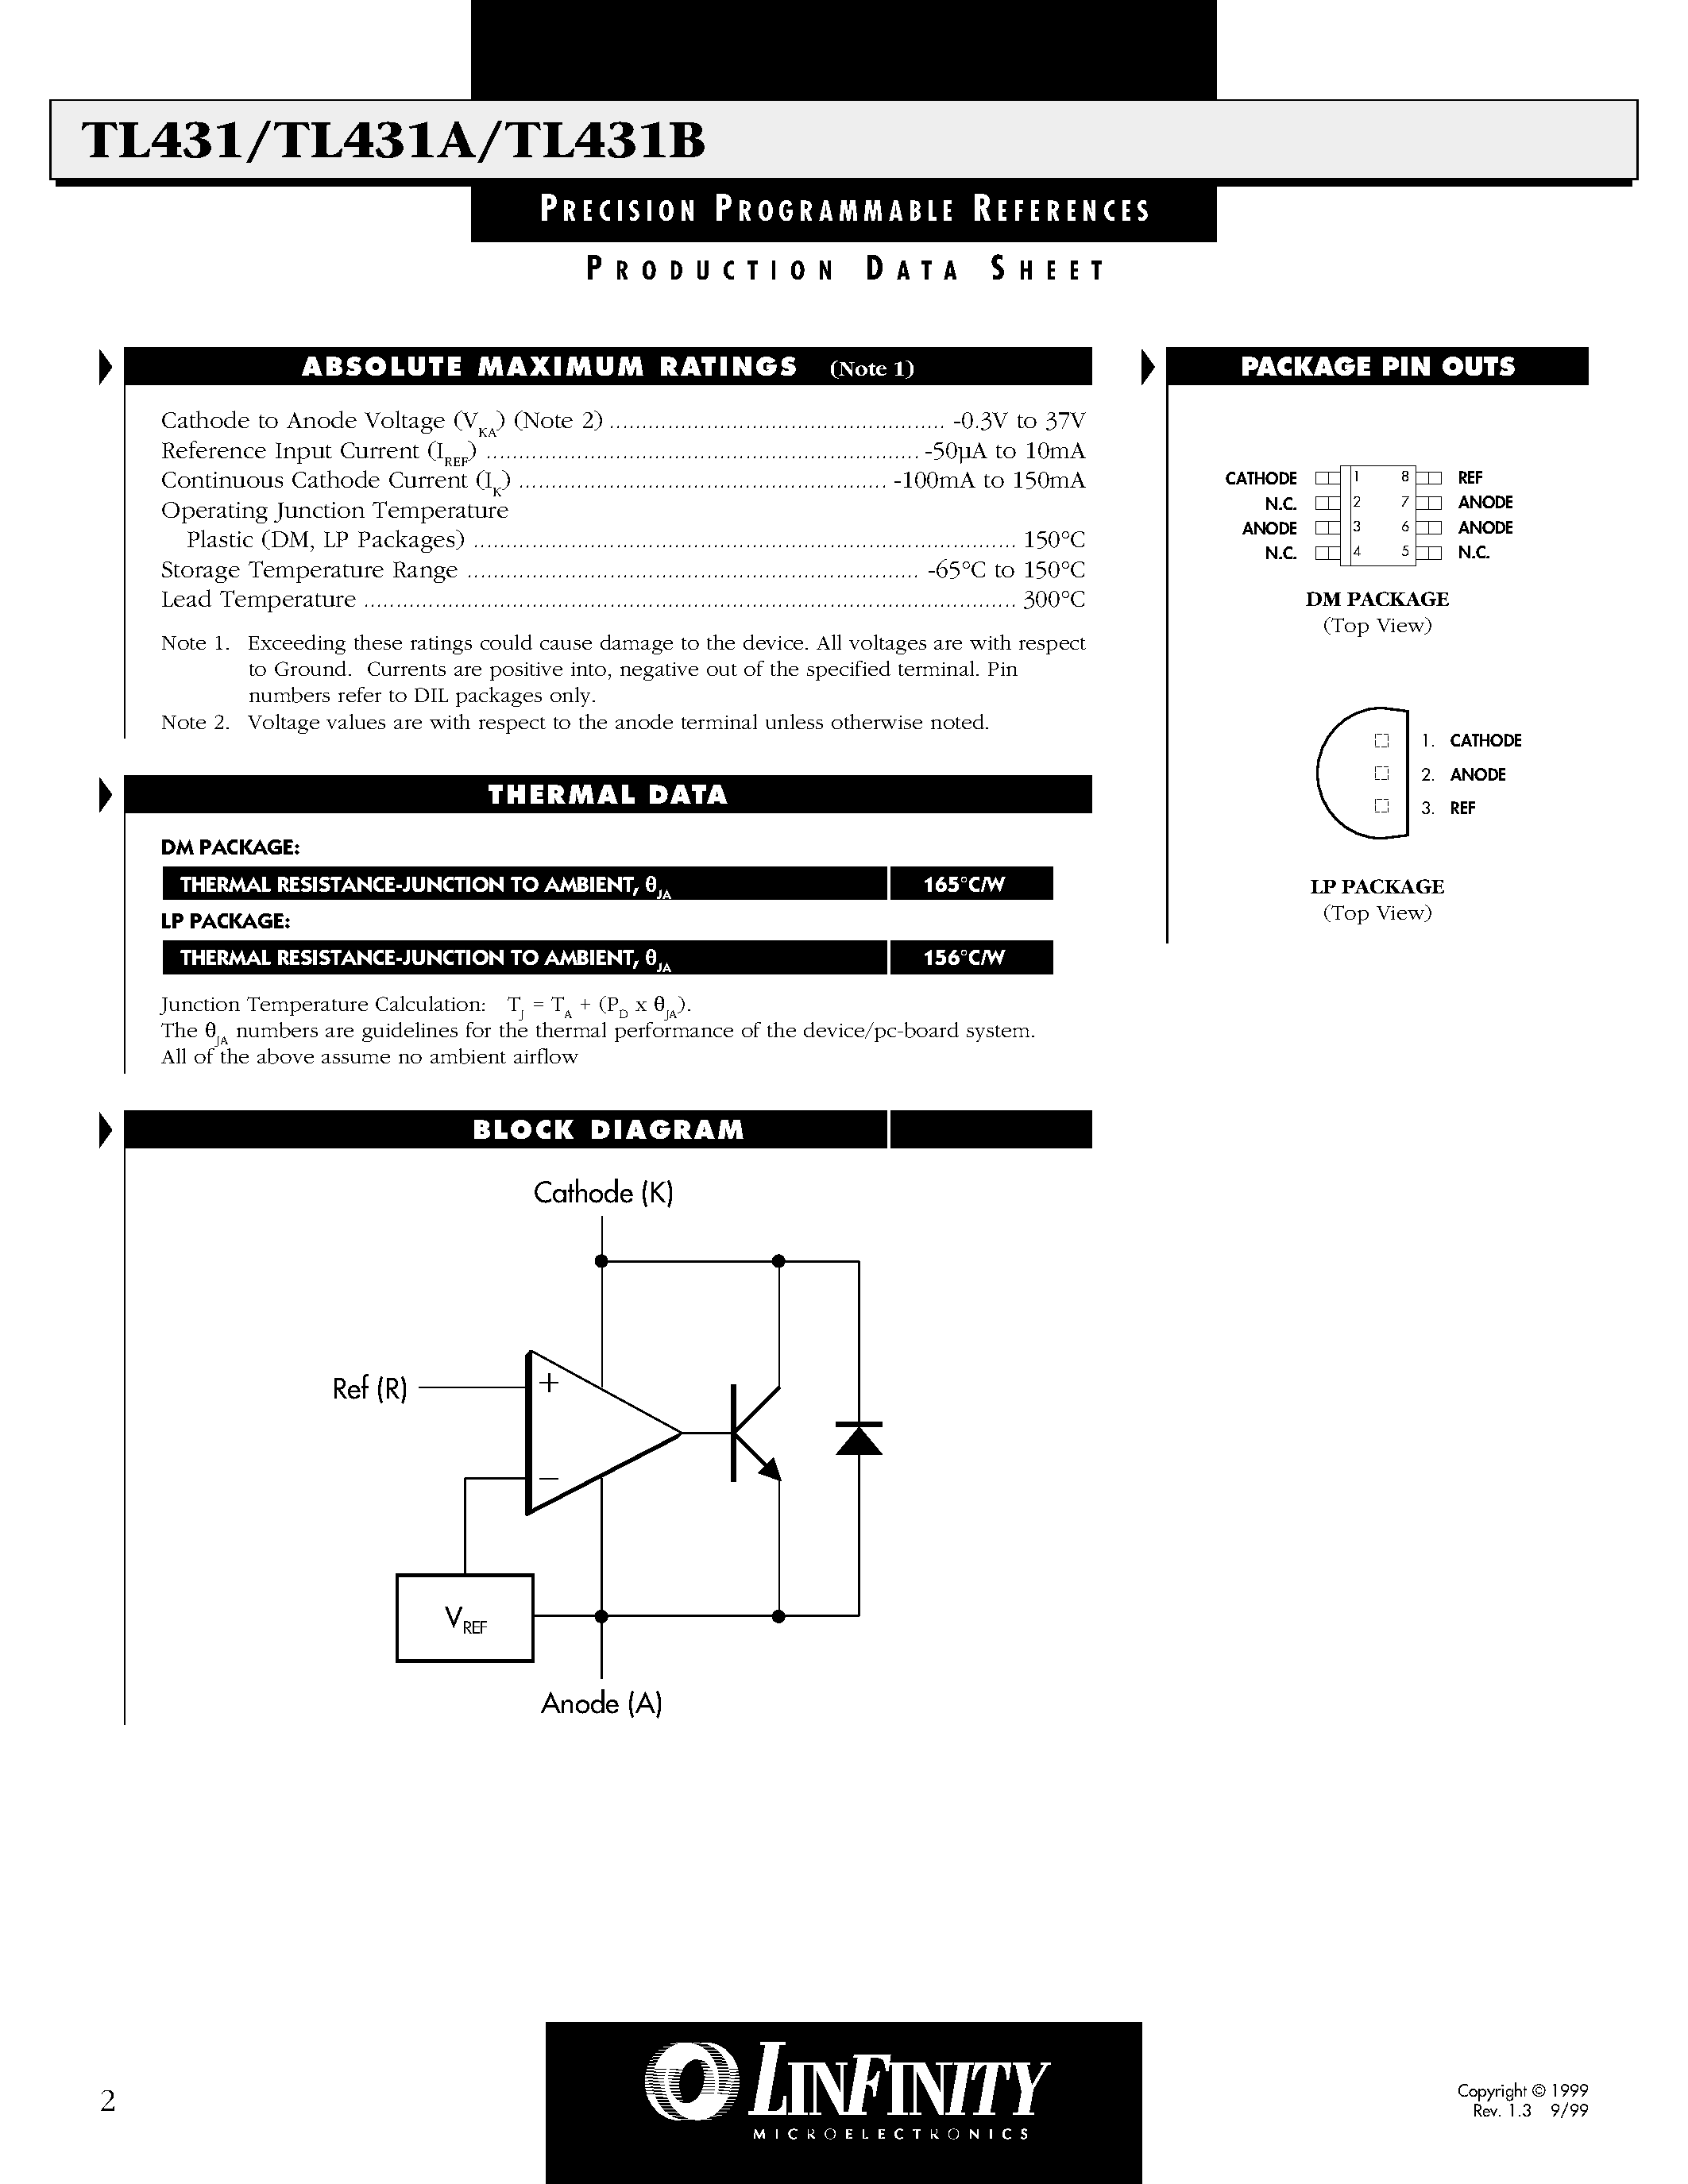 Datasheet TL431ACDM - PRECISION PROGRAMMABLE REFERENCES page 2